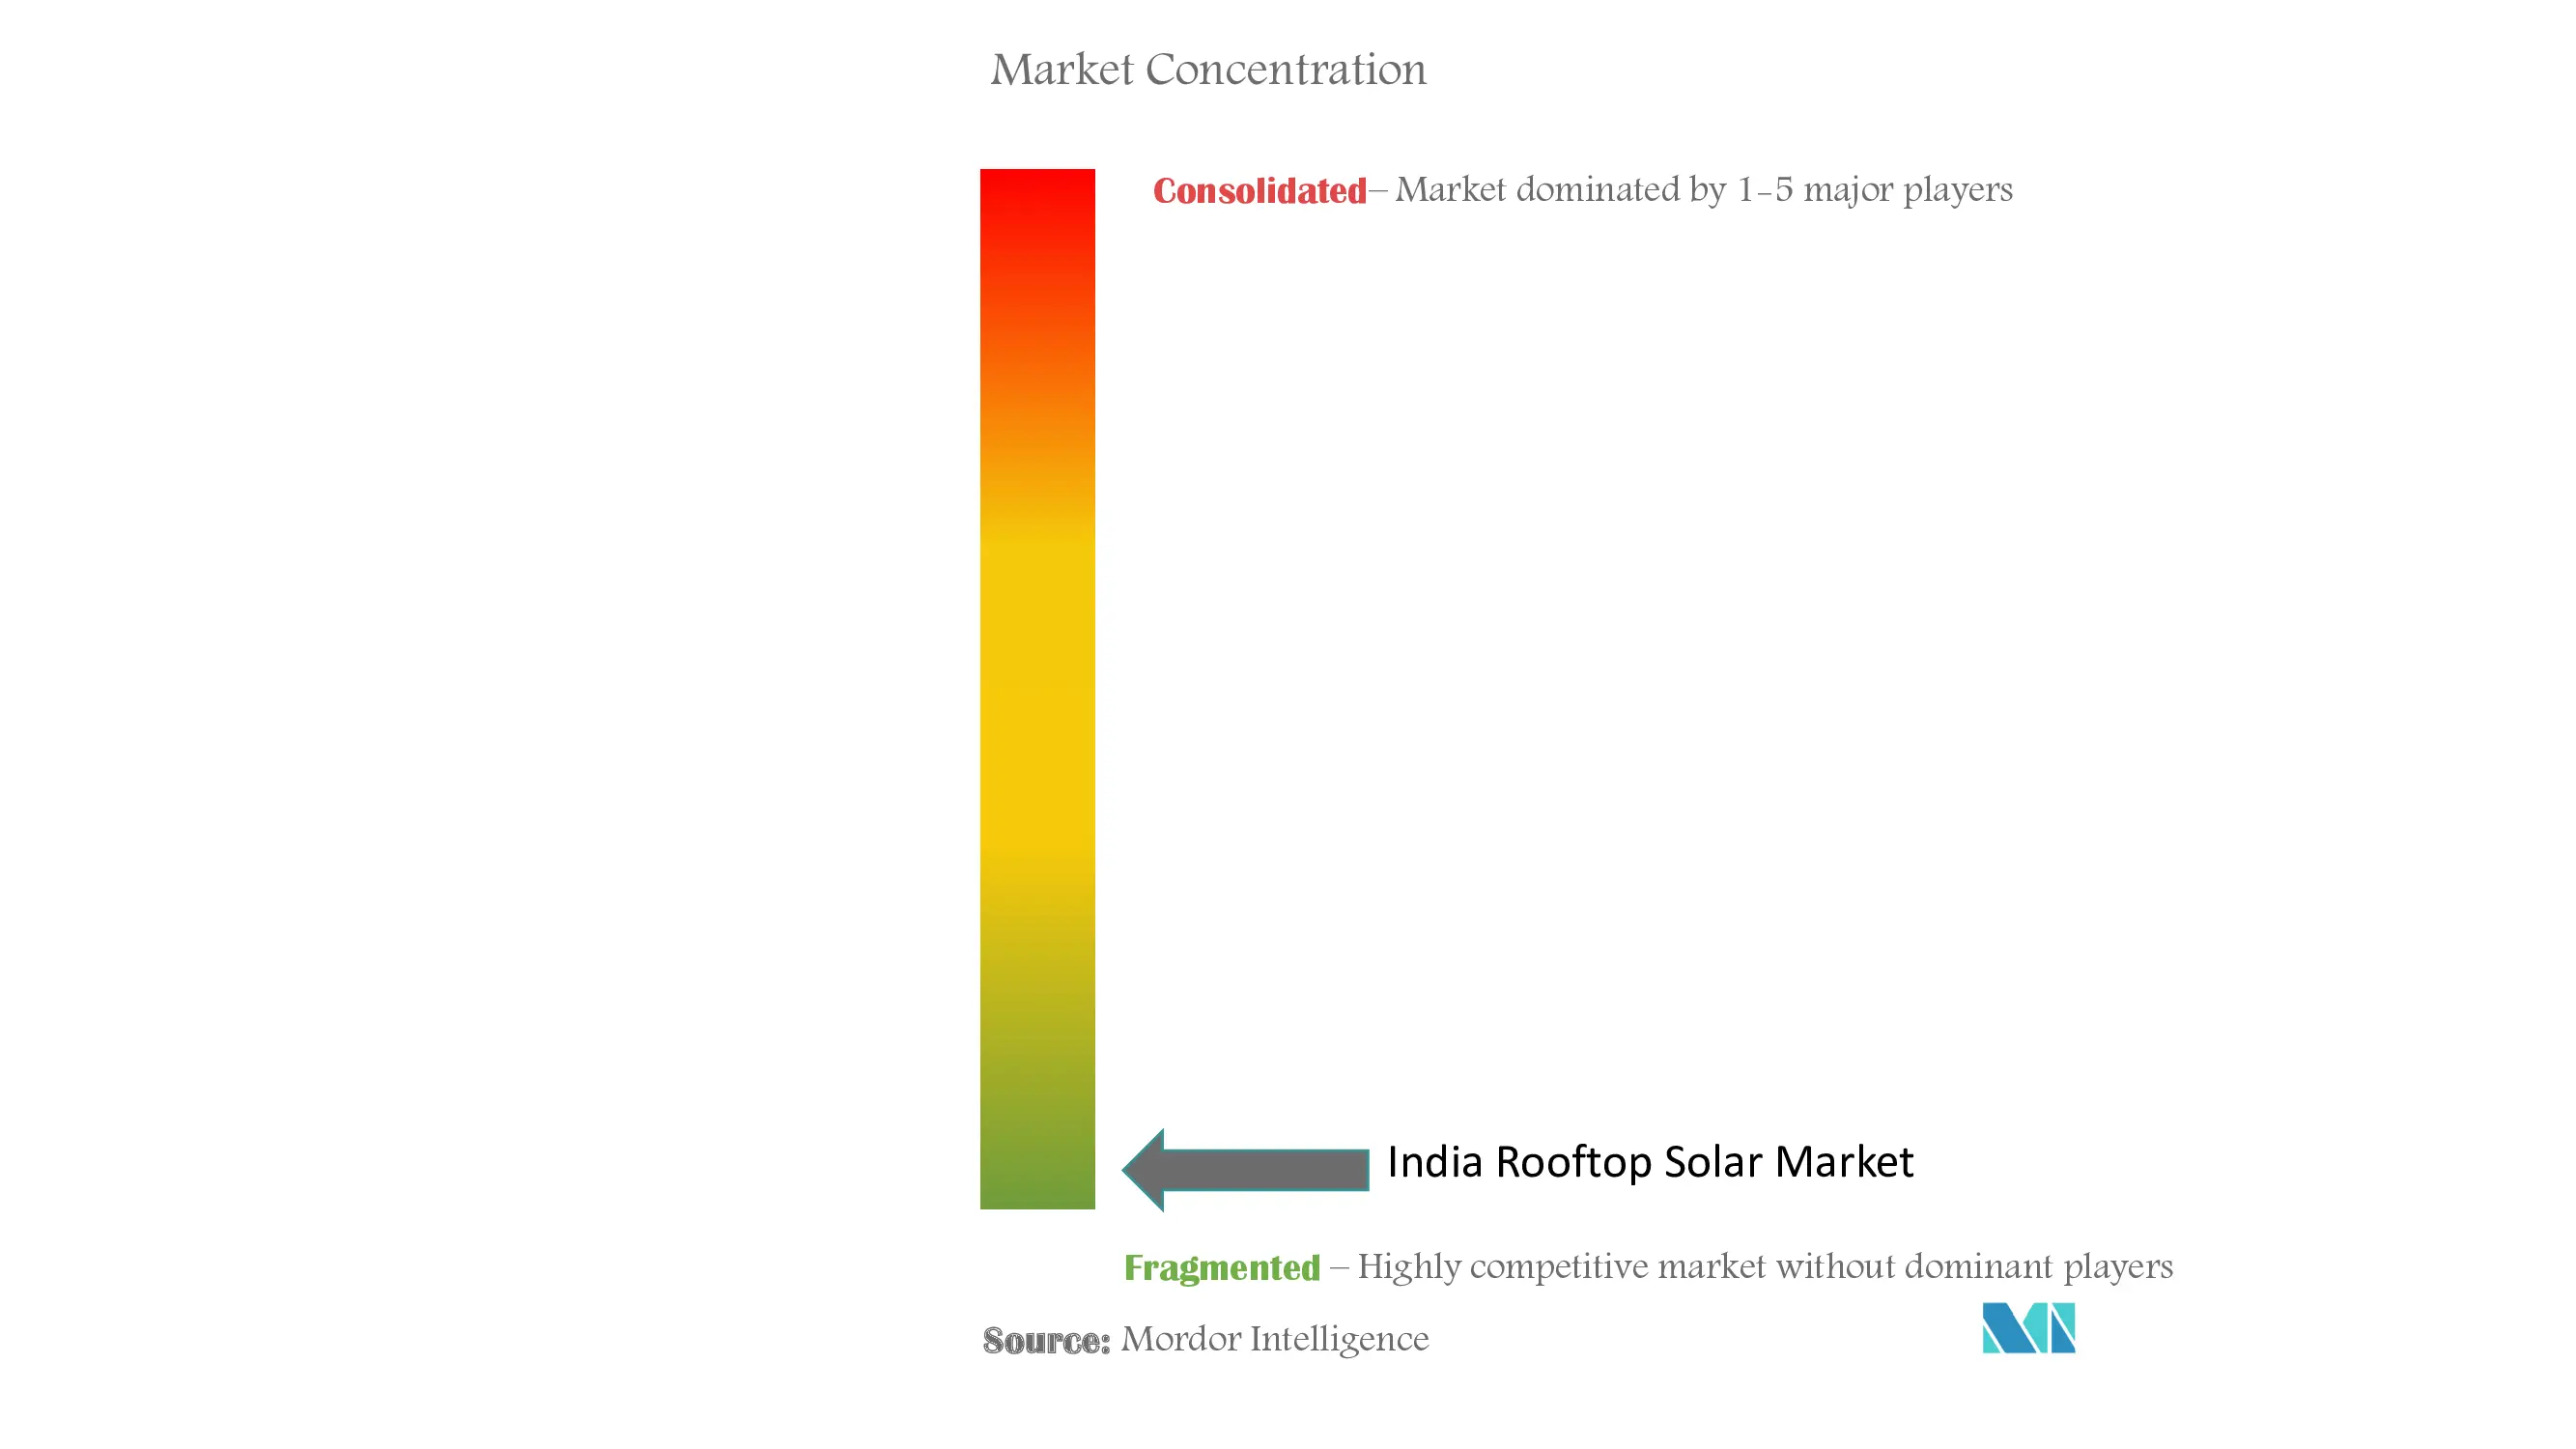 India Rooftop Solar Market Concentration